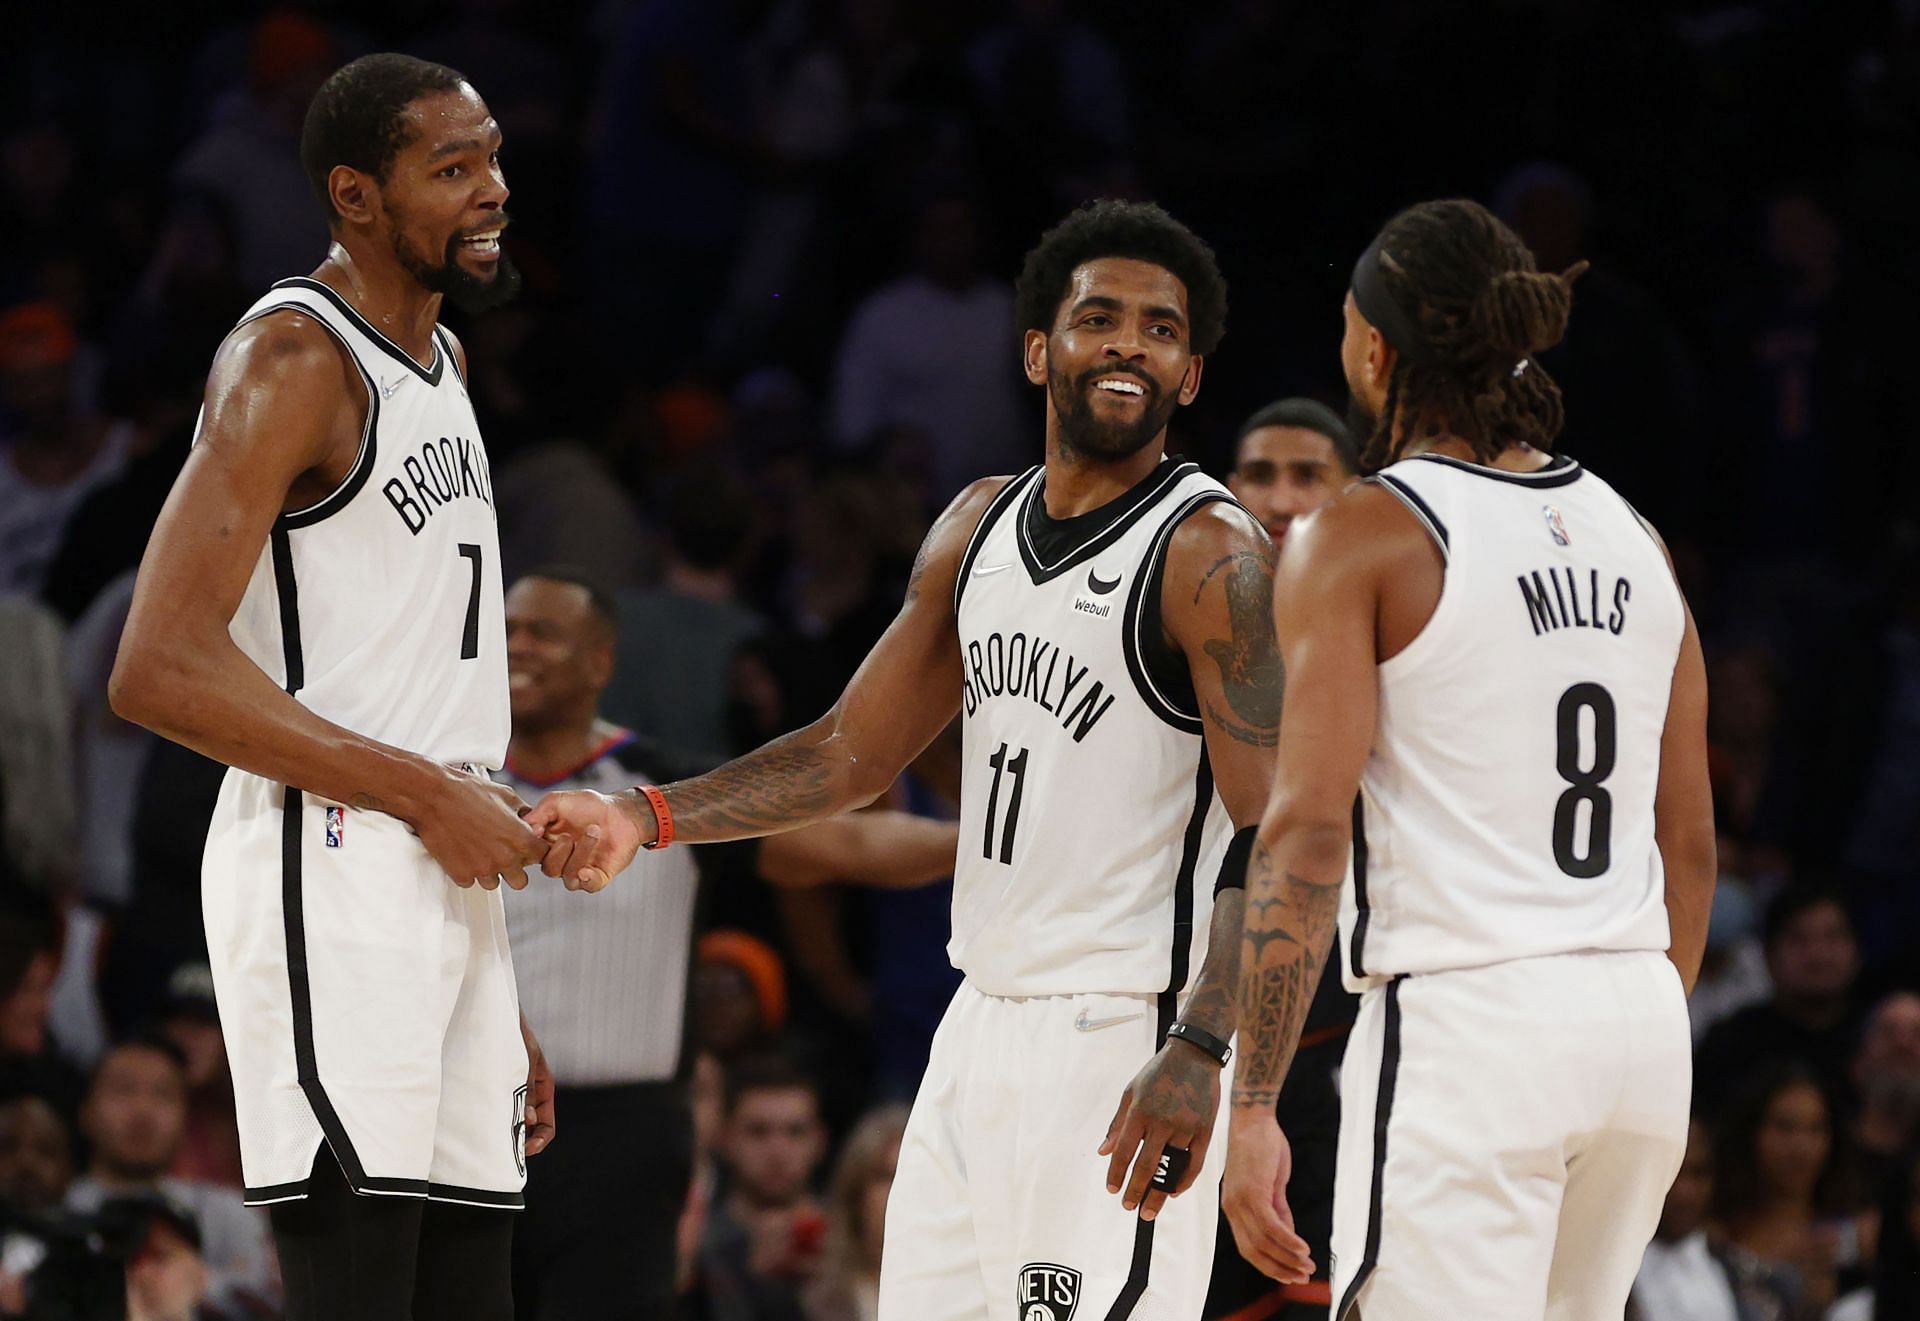 Kevin Durant, Kyrie Irving and Patty Mills for the Brooklyn Nets.